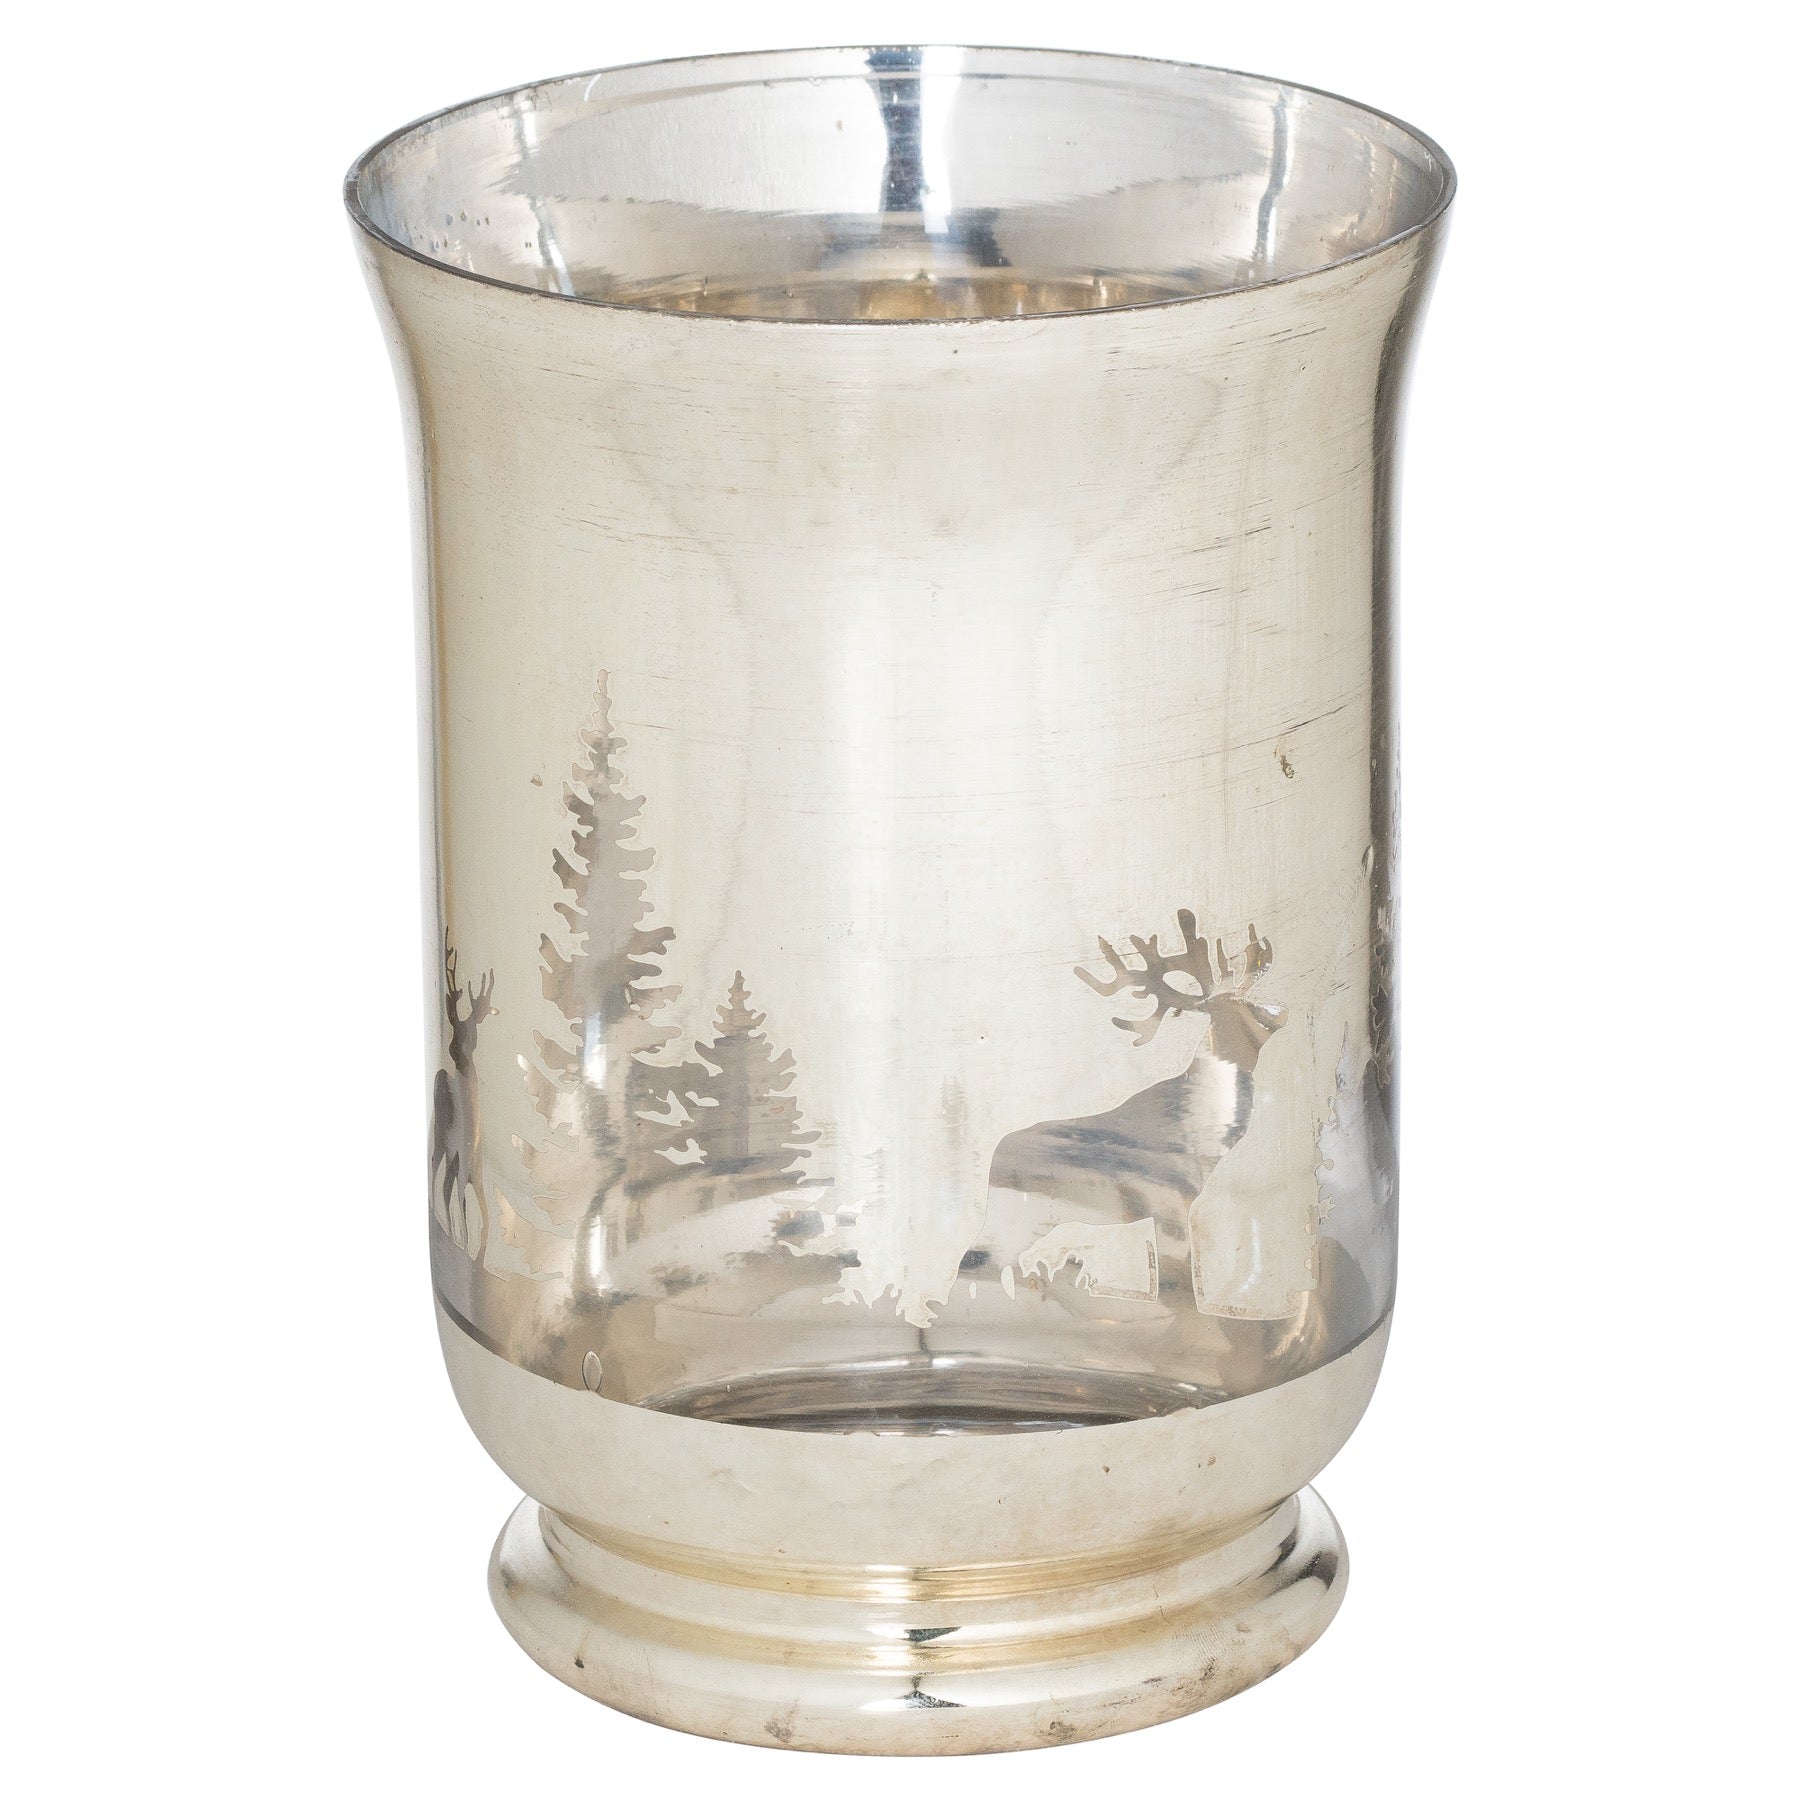 The Noel Collection Silver Forest Large Candle Holder